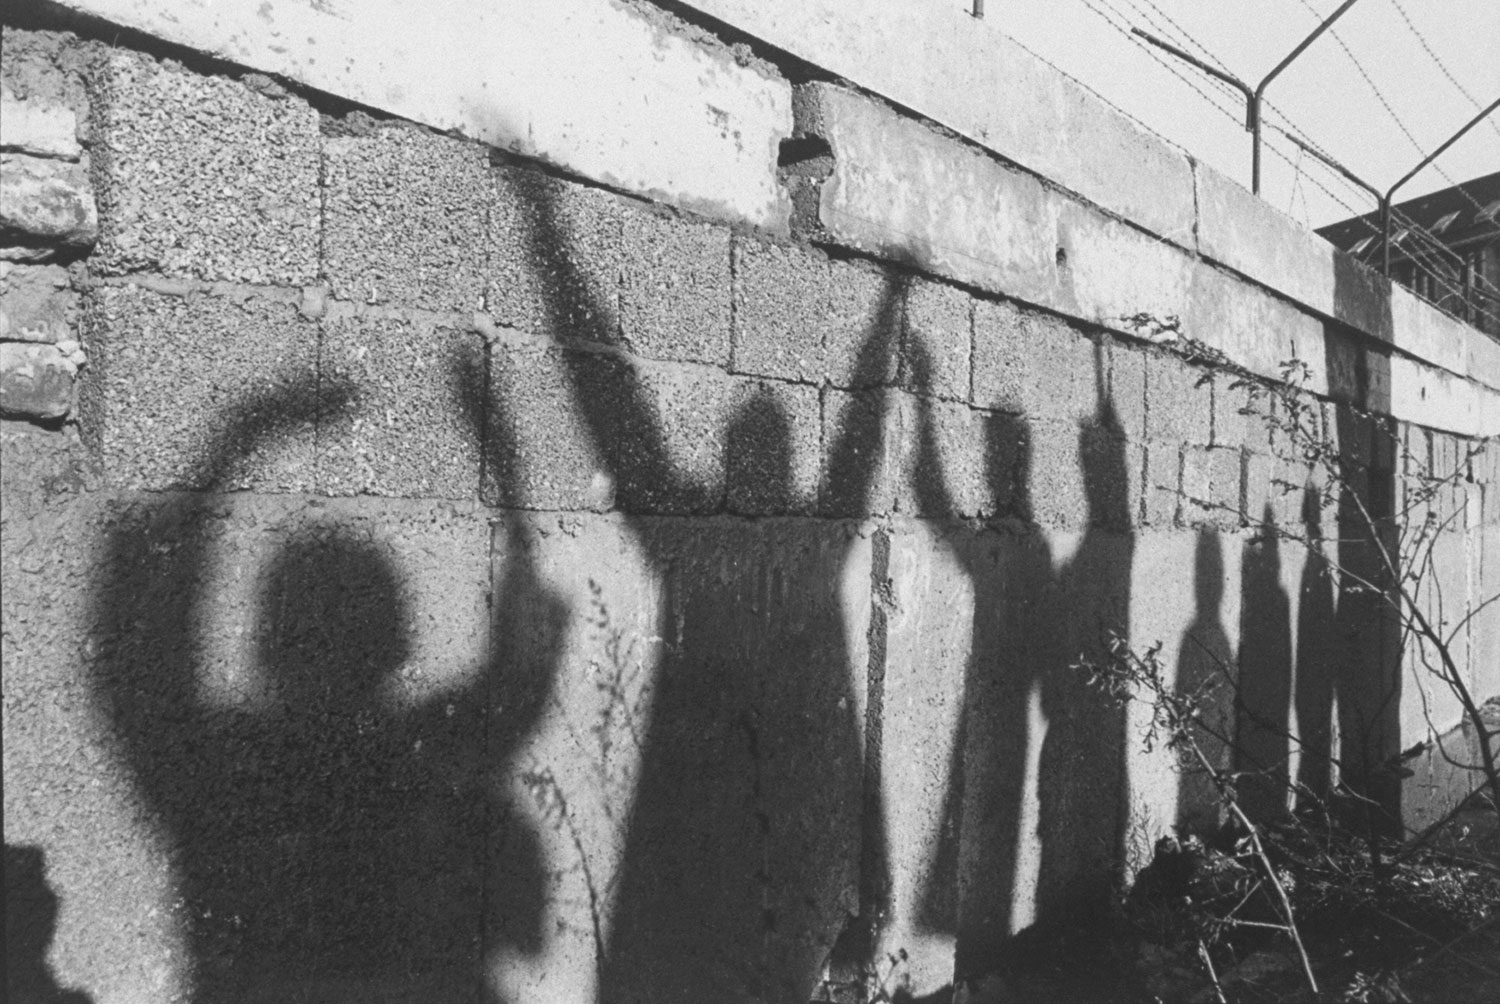 Silhouettes of West Berliners waving to their relatives on the other side are cast across the Berlin Wall.